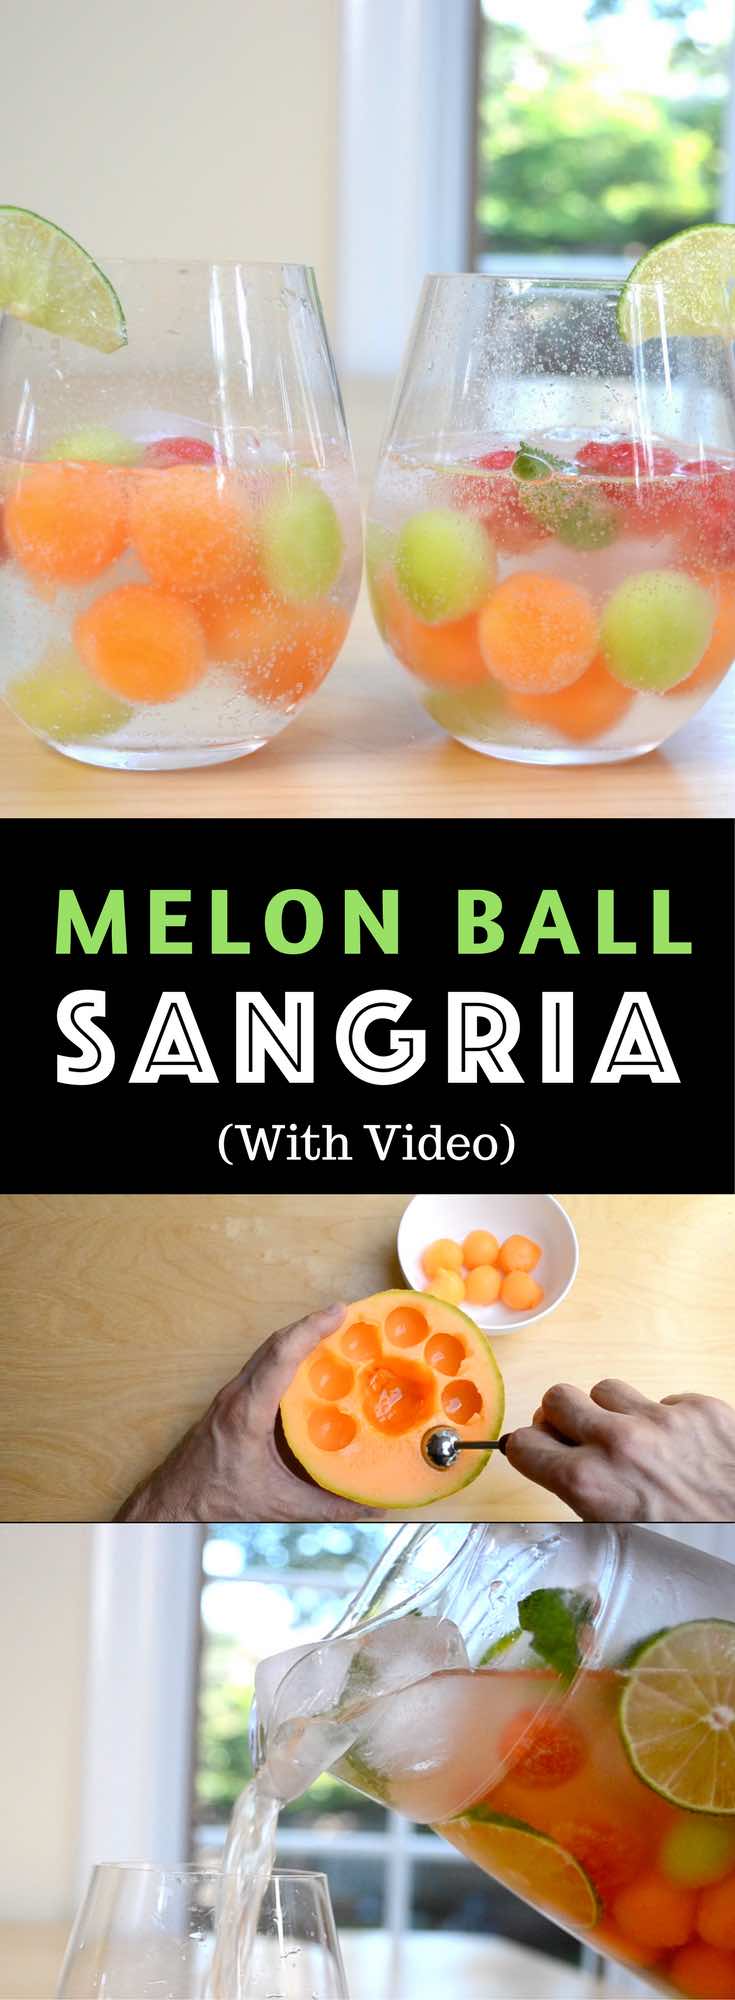 Easy Melon Ball Sangria – Refreshing and delicious melon ball sangria, the most beautiful sangria recipe! All you need is only a few ingredients: watermelon, cantaloupe and honeydew melons, moscato wine, sugar, lime, and sparkling water. Easy drinks recipe. Video recipe. 